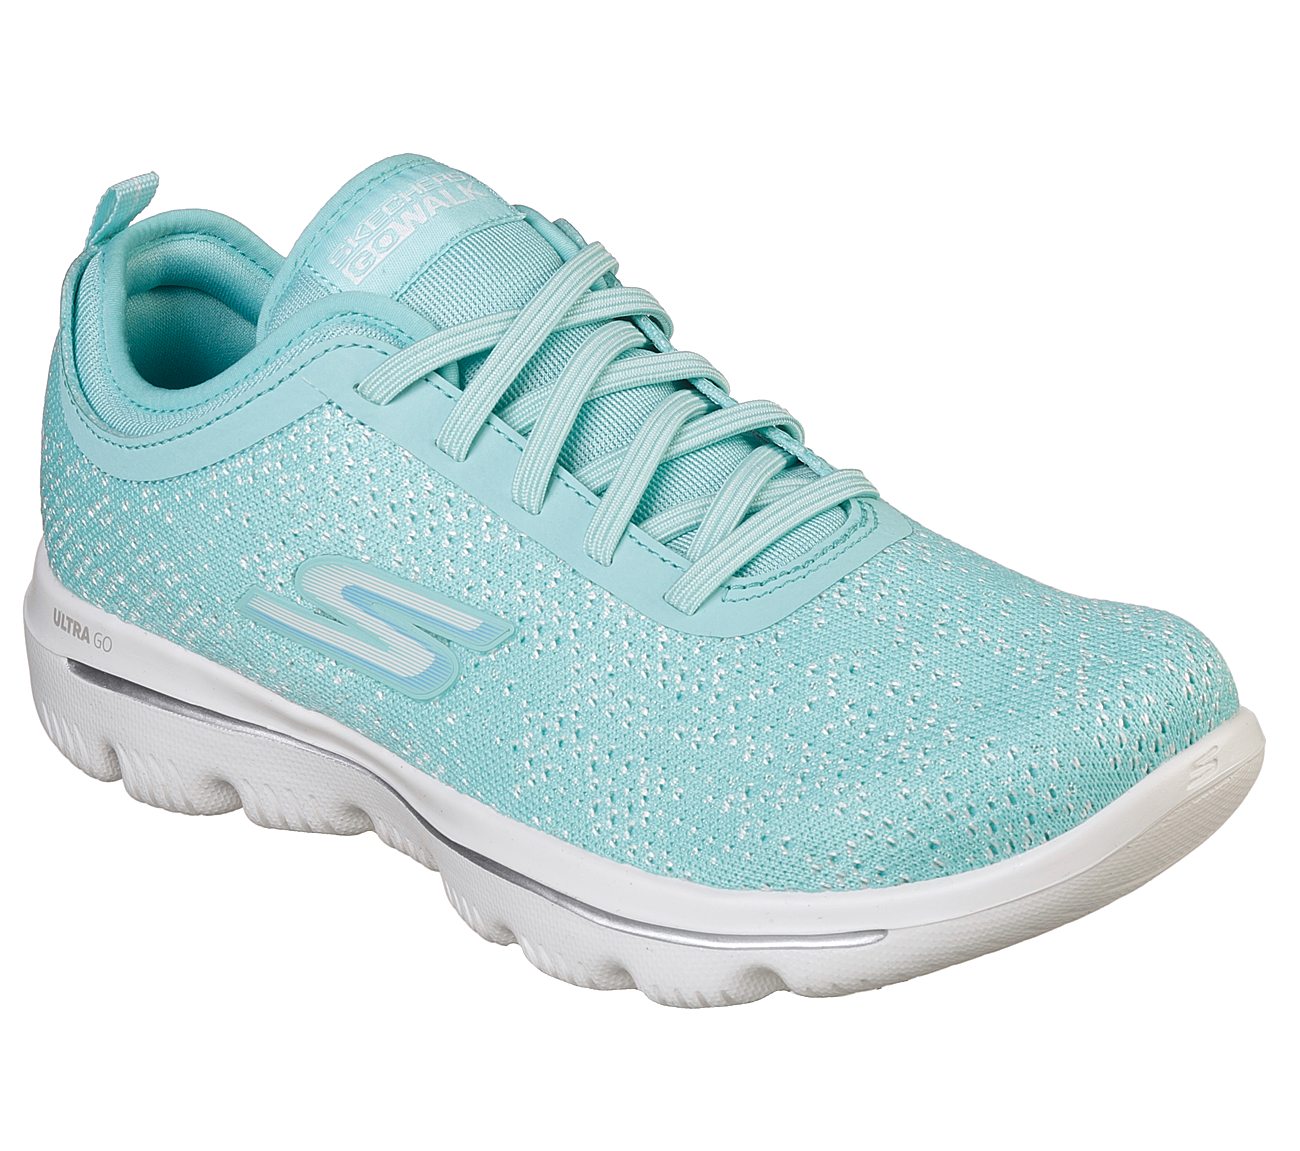 GO WALK EVOLUTION ULTRA-MIRAB, TURQUOISE Footwear Lateral View